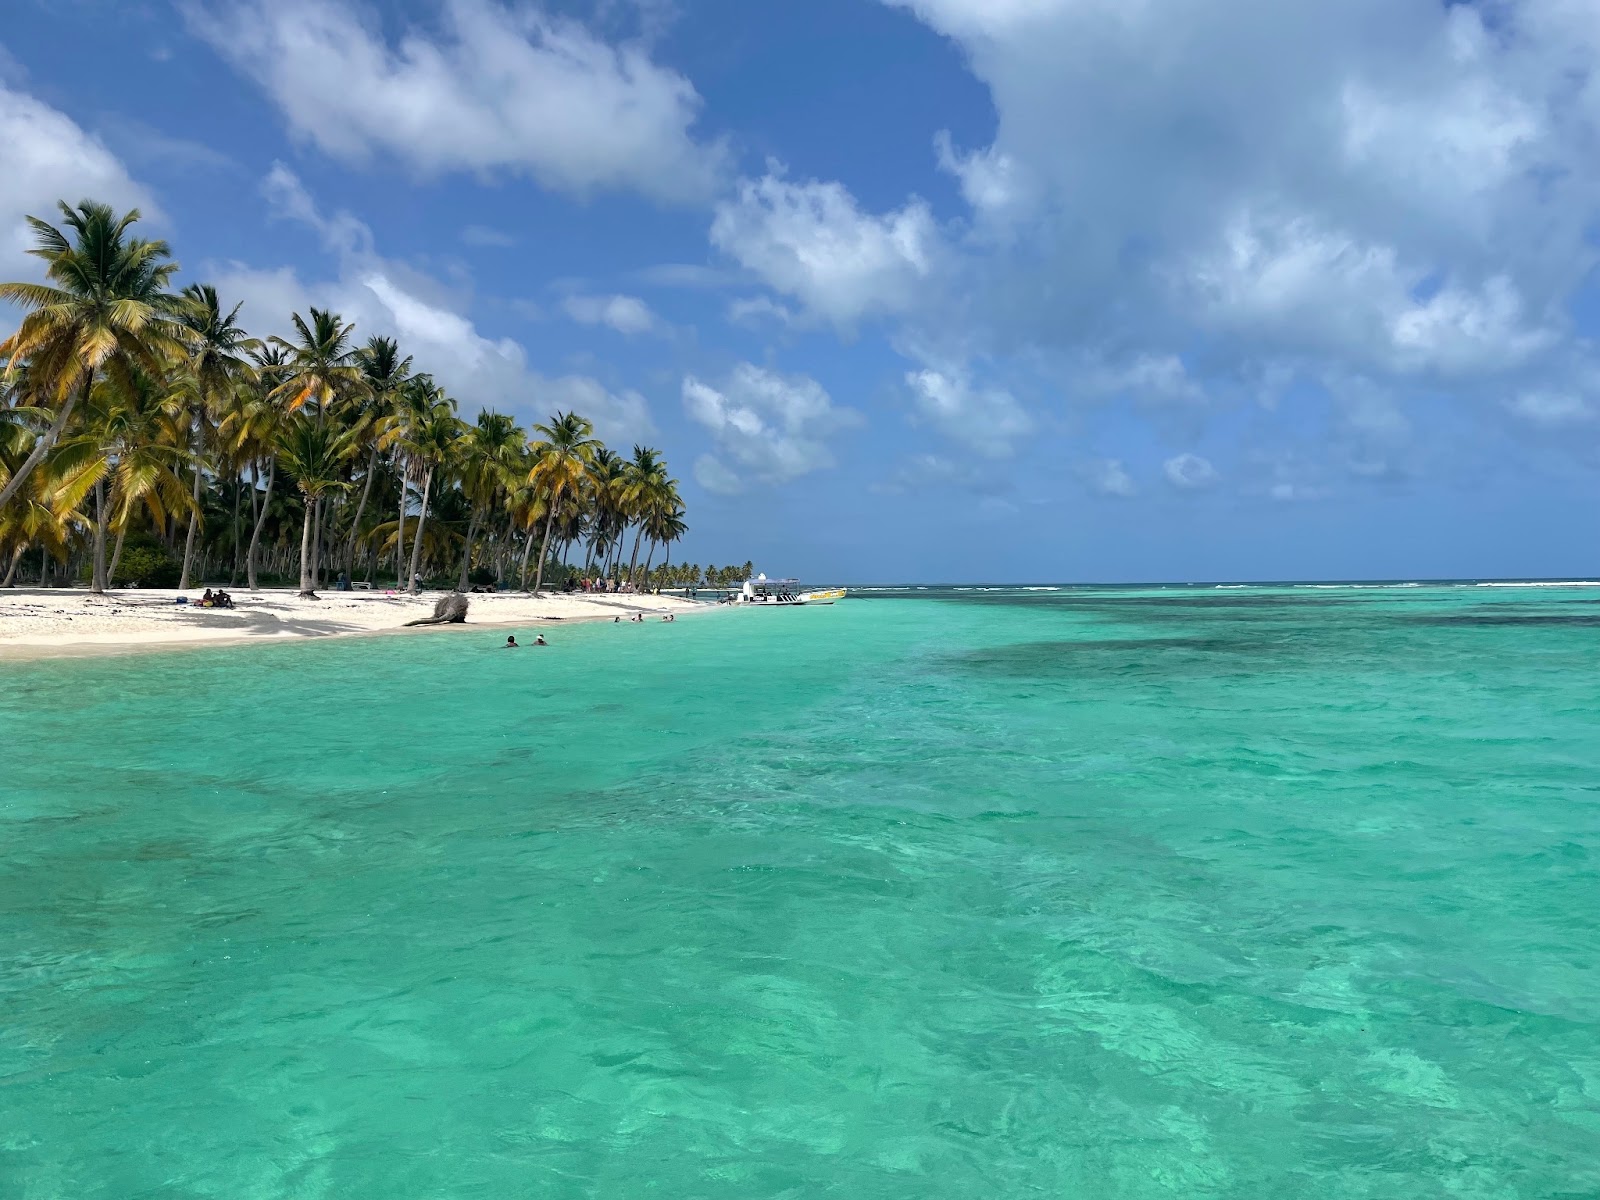 In May 2023, Saona Island pledged to eliminate single-use plastic within 60 days, marking a significant move within the Dominican Republic's main tourism hub.